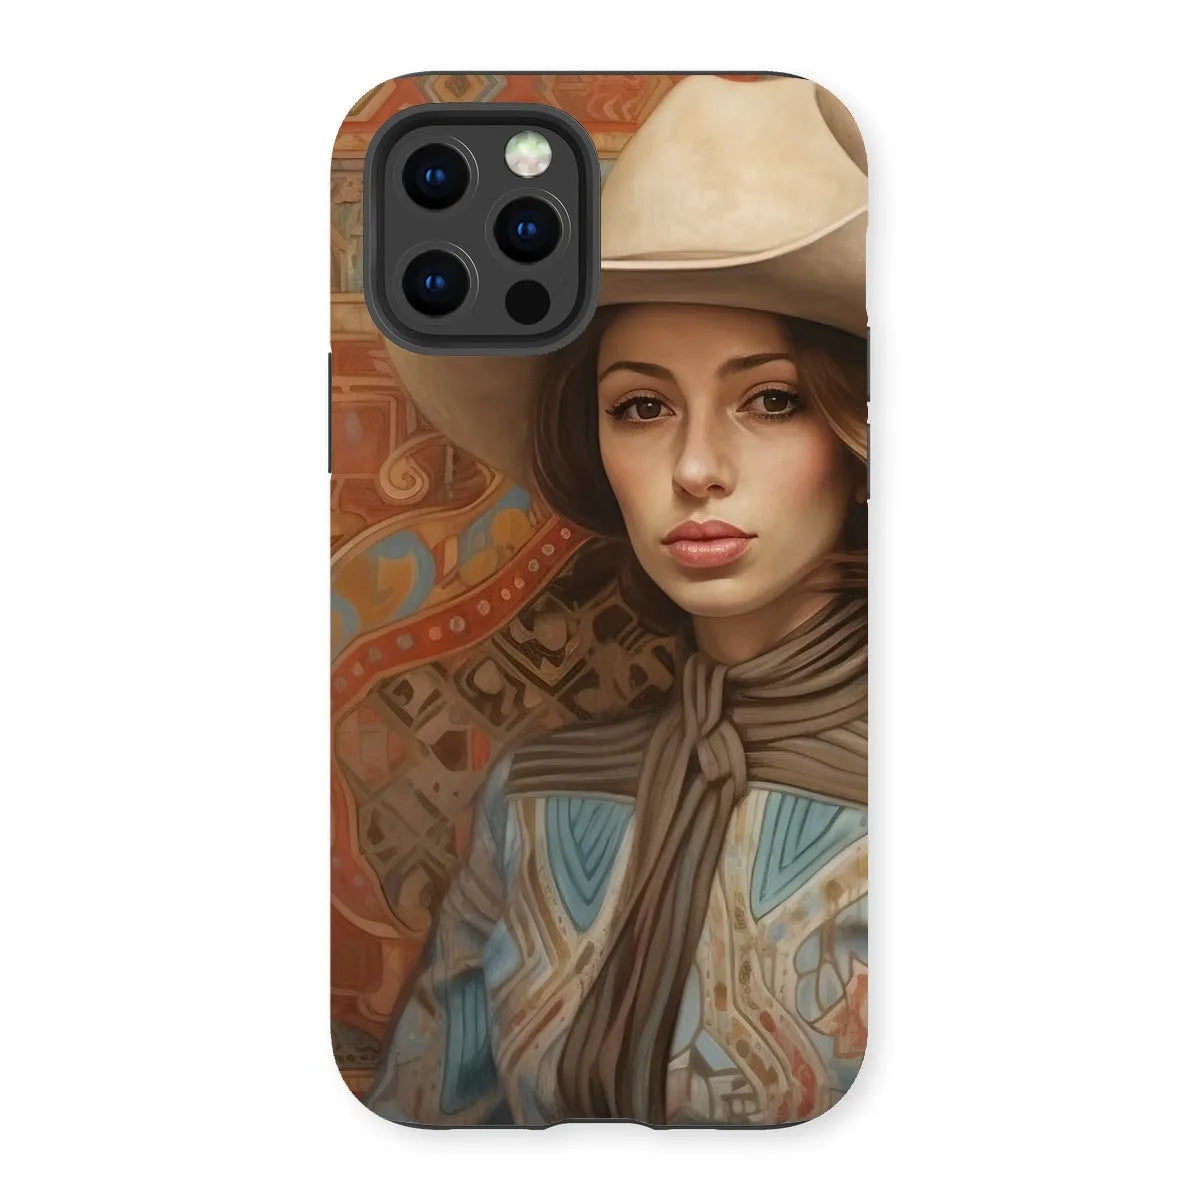 Anahita The Lesbian Cowgirl - Sapphic Art Phone Case - Iphone 13 Pro / Matte - Mobile Phone Cases - Aesthetic Art